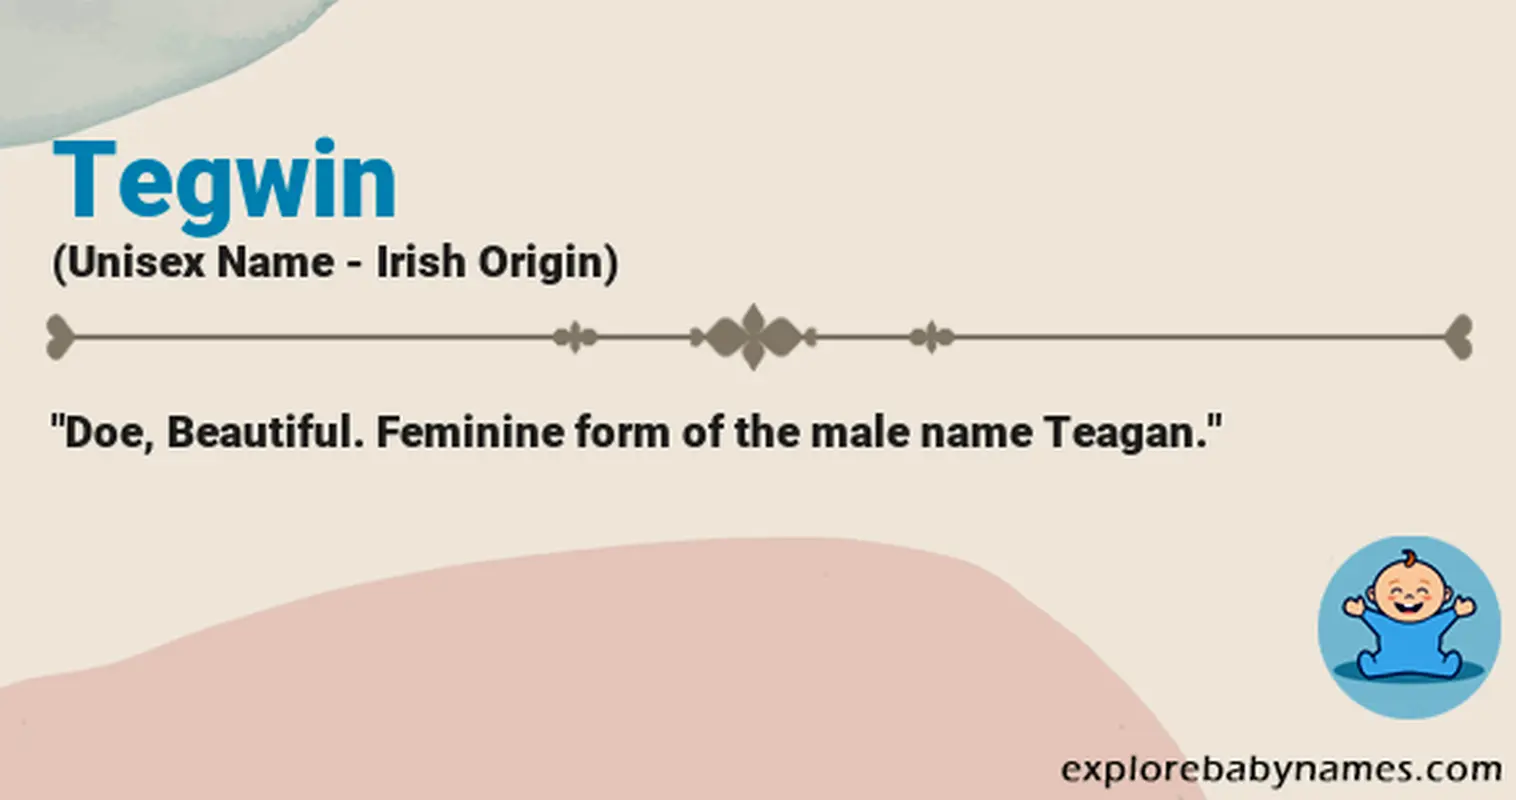 Meaning of Tegwin